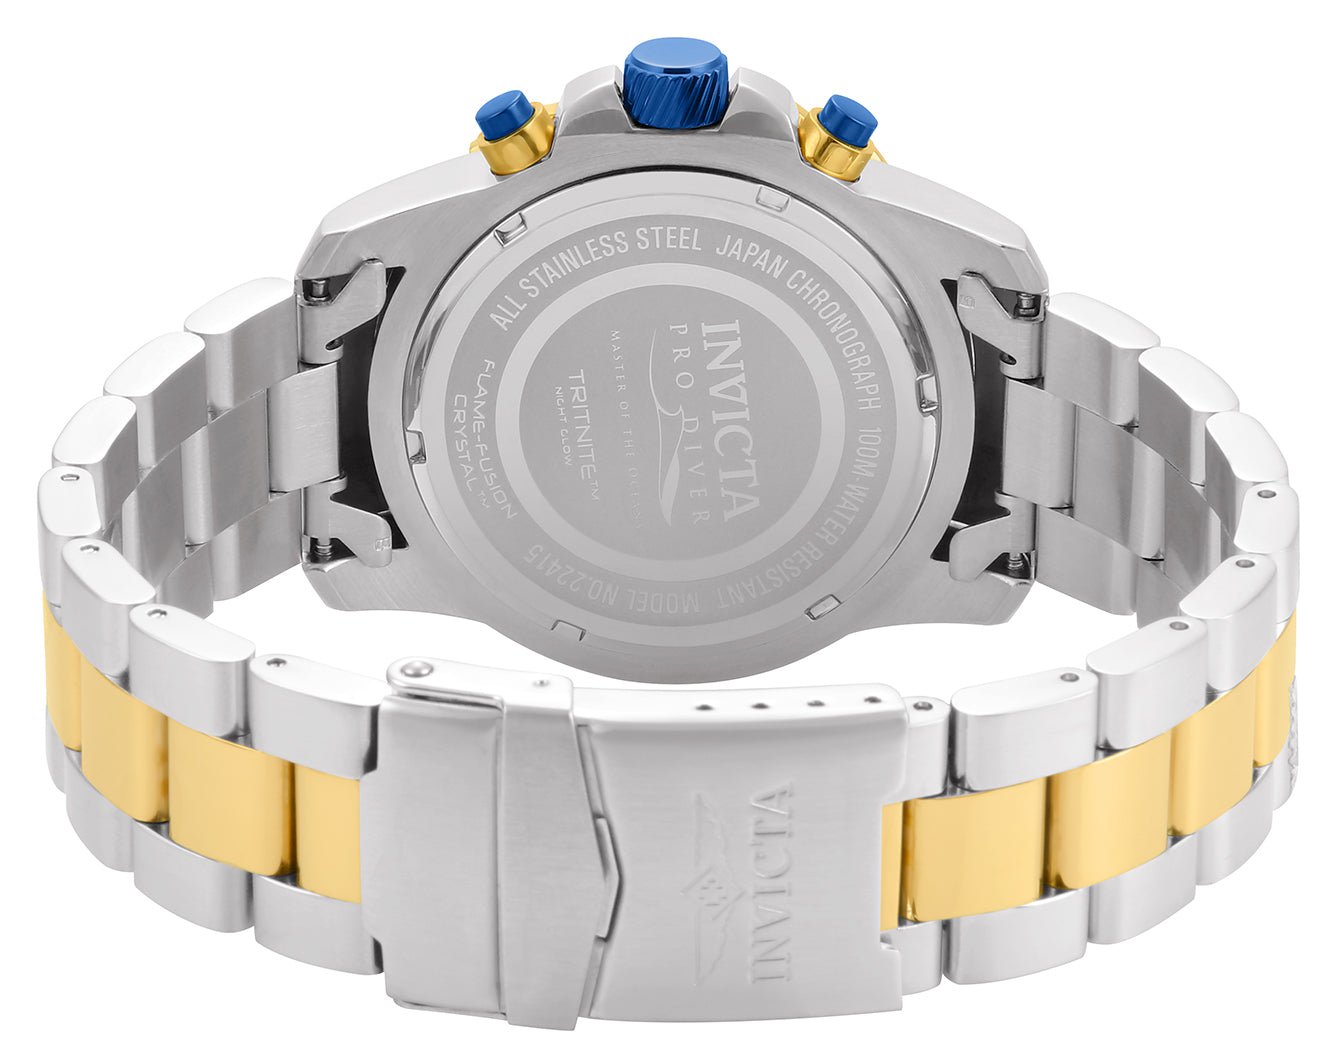 Detailed view of the Invicta Pro Diver SCUBA 22415 with stainless steel bracelet